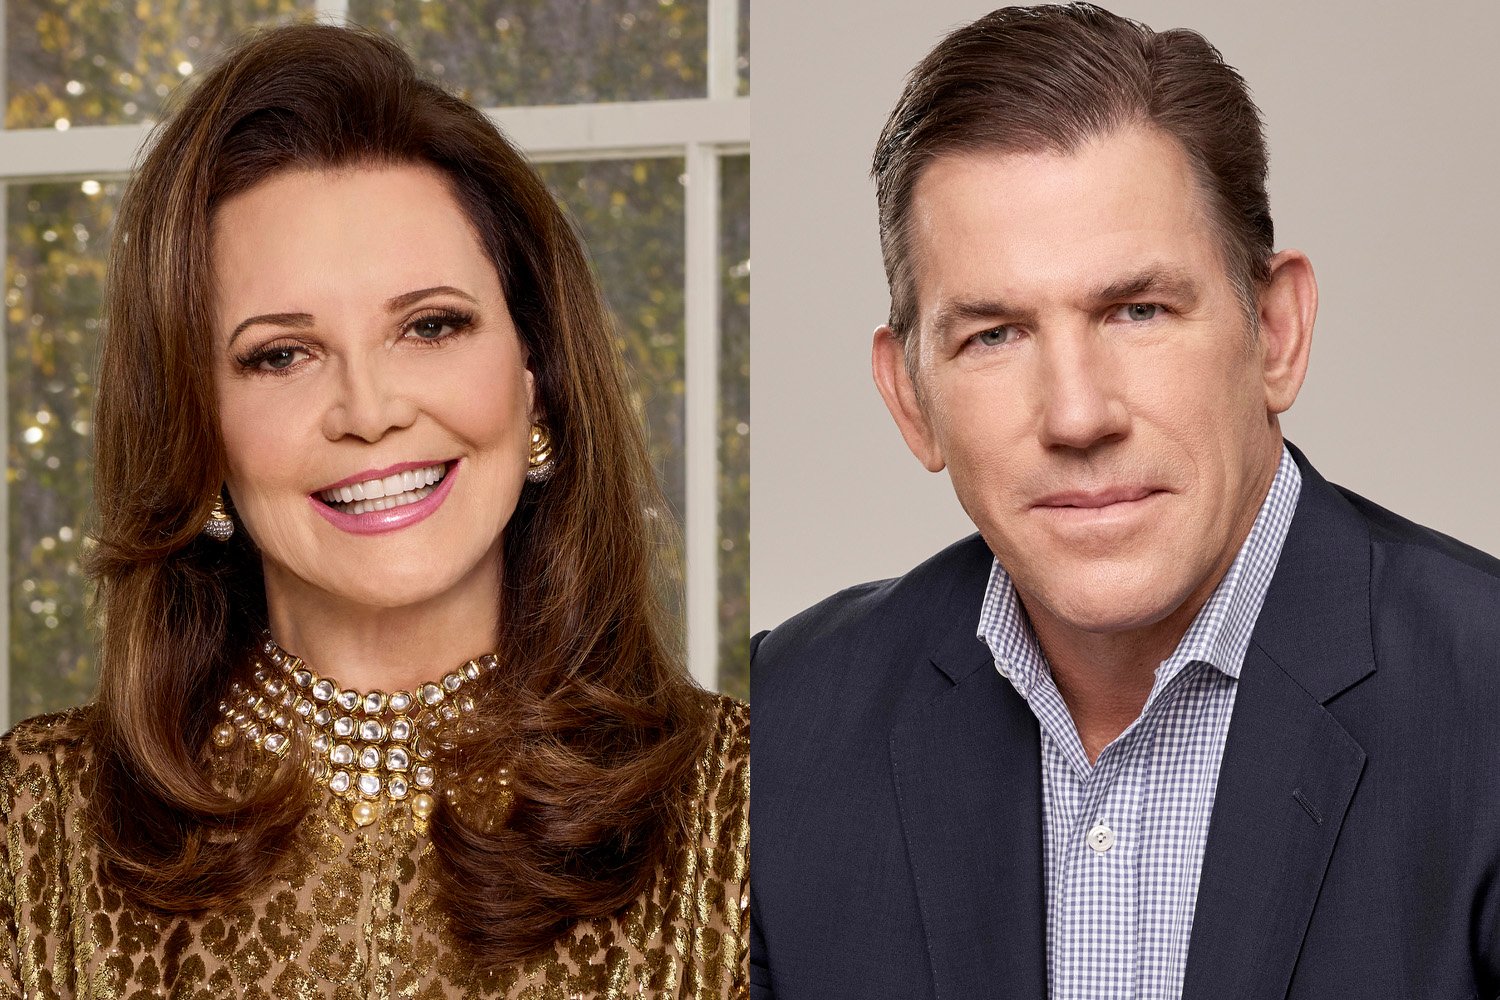 Patricia Altschul and Thomas Ravenel smiling